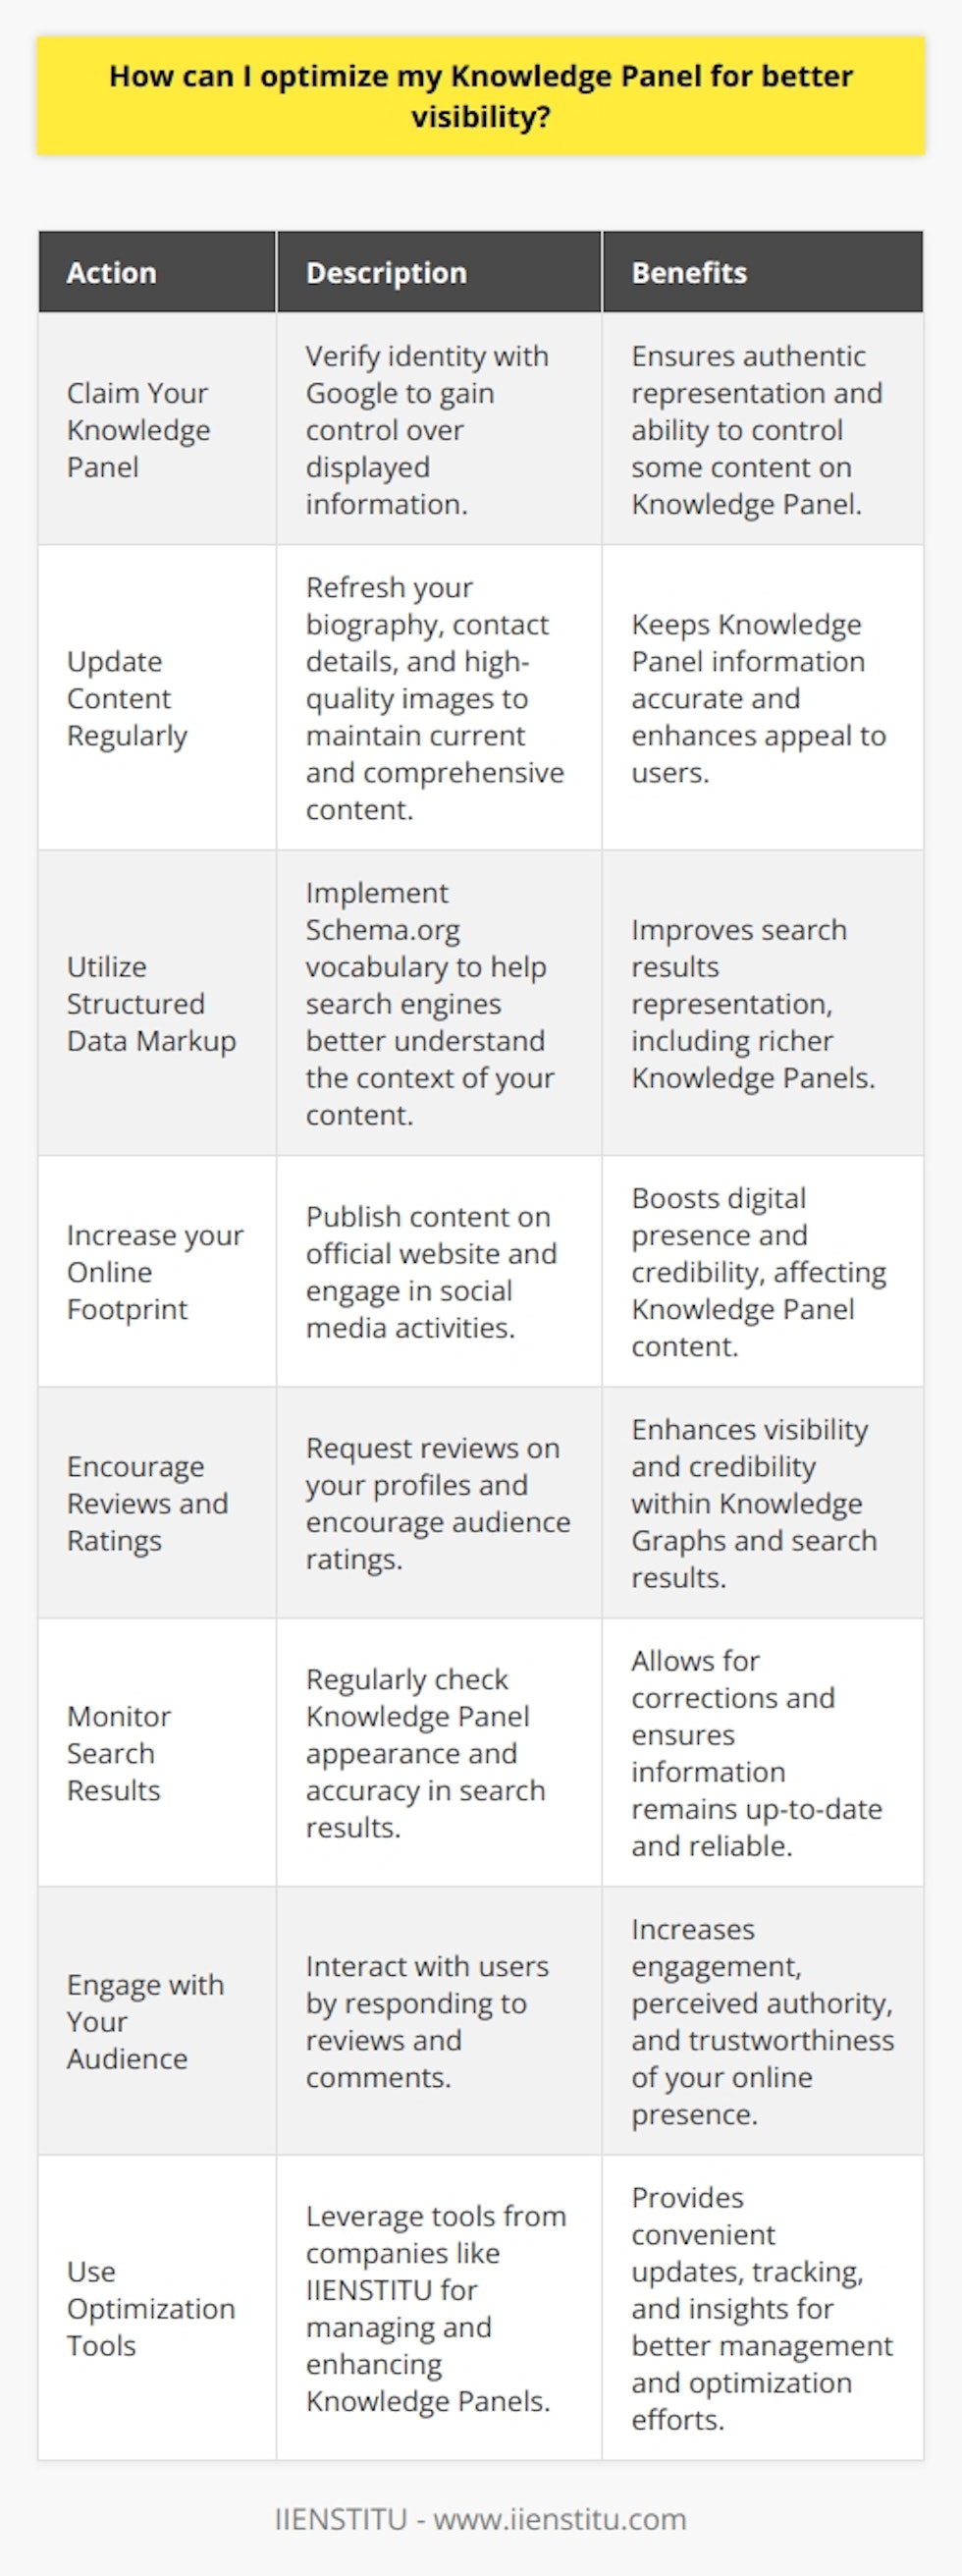 To optimize your Knowledge Panel for better visibility, it is essential to have a strategic approach toward managing your online presence. Here are some steps you can take to enhance the performance of your Knowledge Panel:1. Claim Your Knowledge Panel: If you haven't already, the first step is to claim your Knowledge Panel. This process involves verifying your identity with Google to ensure that you are the authentic entity the Knowledge Panel represents. This gives you direct control over some of the information displayed.2. Update Content Regularly: Ensure that the content in your Knowledge Panel is current and comprehensive. This includes updating your biography, contact details, and any other relevant information that reflects the most accurate picture of you or your business. High-quality images and a detailed description can also help boost your Knowledge Panel's appeal.3. Utilize Structured Data Markup: Utilize Schema.org vocabulary to markup your website's content. Structured data helps search engines understand the context of your content, which can lead to a richer representation in search results, including Knowledge Panels.4. Increase your Online Footprint: A Knowledge Panel's visibility can benefit from a broad online presence. Regularly publish authoritative and relevant content on your official website and be active on various social media platforms to increase your digital footprint. This contributes to the perception of your entity as notable and can impact the information that appears in your Knowledge Panel.5. Encourage Reviews and Ratings: Encourage satisfied customers or audience members to leave positive reviews and rate your services on your official profiles. High ratings can influence knowledge graph results and positively impact your visibility and credibility.6. Monitor Search Results: Keep an eye on how your Knowledge Panel appears in search results. Monitor the accuracy and timeliness of the information, checking for any discrepancies that may mislead or confuse your audience.7. Engage with Your Audience: Responding to reviews, comments, and interacting with users can increase engagement and show that you actively maintain your online presence. This kind of interaction can also contribute to the perceived authority and trustworthiness of your Knowledge Panel.8. Use Optimization Tools: Knowledge Panel optimization tools, provided by companies like IIENSTITU, can help you manage and enhance your Knowledge Panel. These tools offer features to conveniently update your Panel, track performance, and gain insights into audience behavior.Given the dynamic nature of search engines and online information, it is pivotal to conduct regular reviews of your Knowledge Panel and tweak your strategy accordingly. By taking these actions, you can significantly improve the visibility and effectiveness of your Knowledge Panel, helping you reach your target audience more effectively.